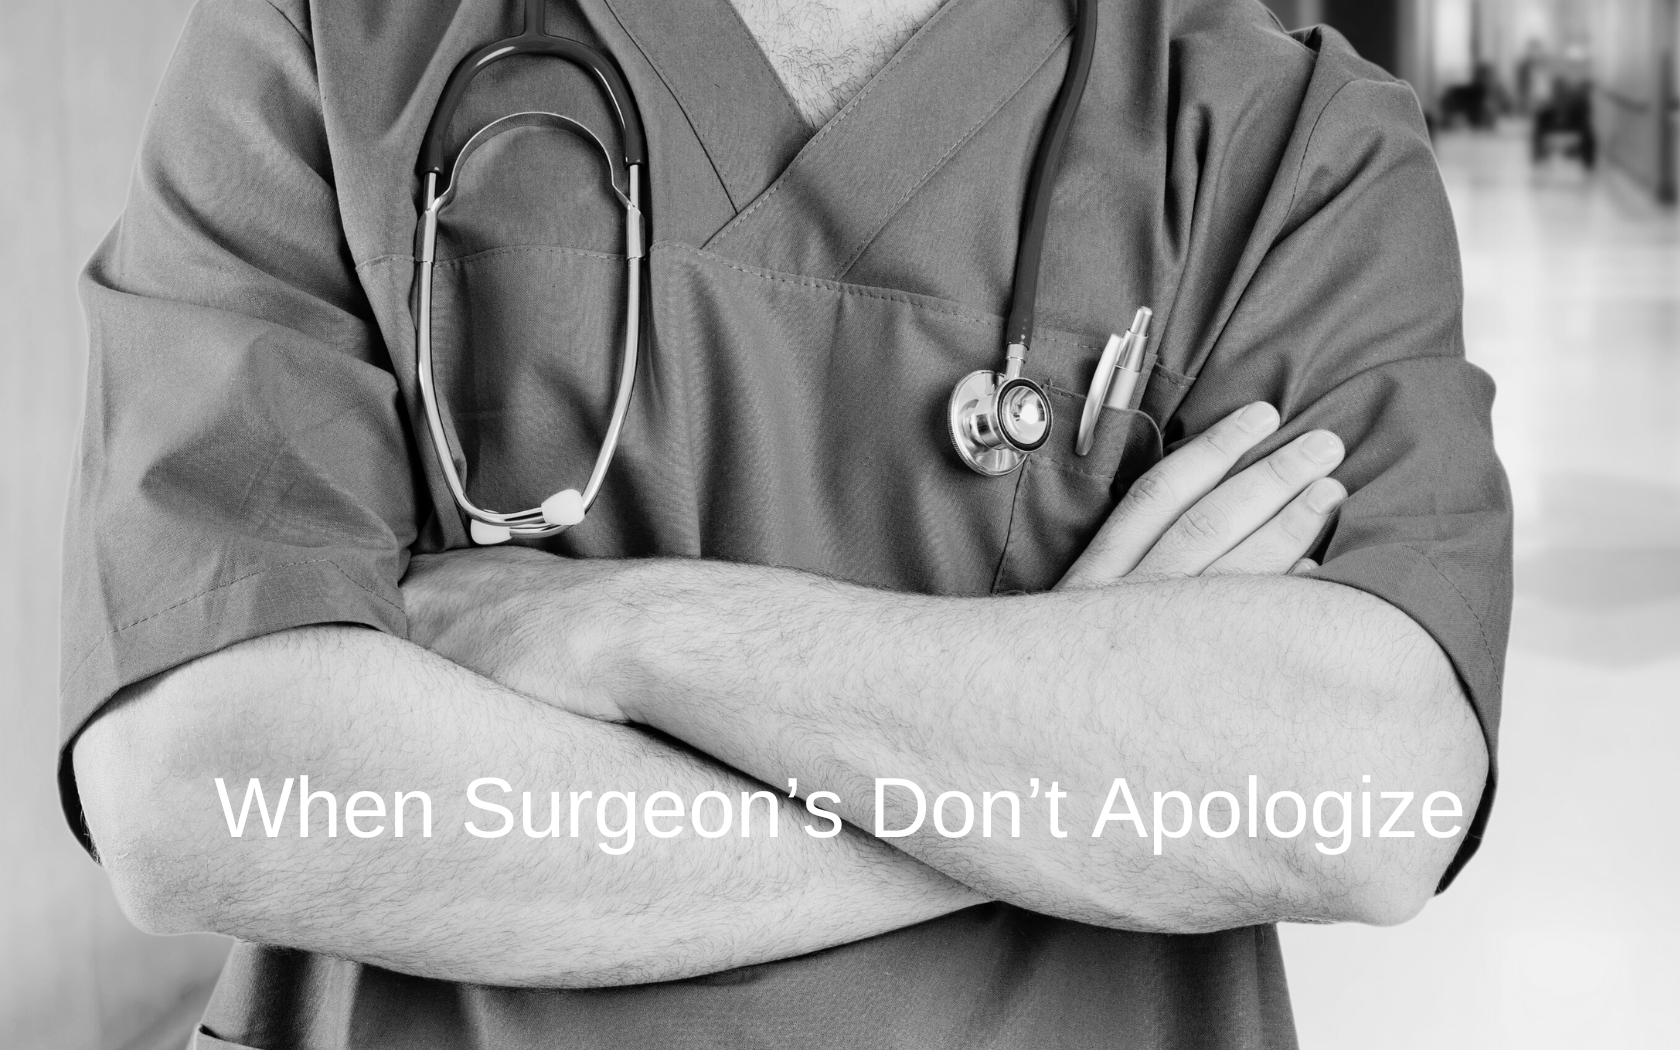 Surgeons fails to apologize for medical malpractice mistake.